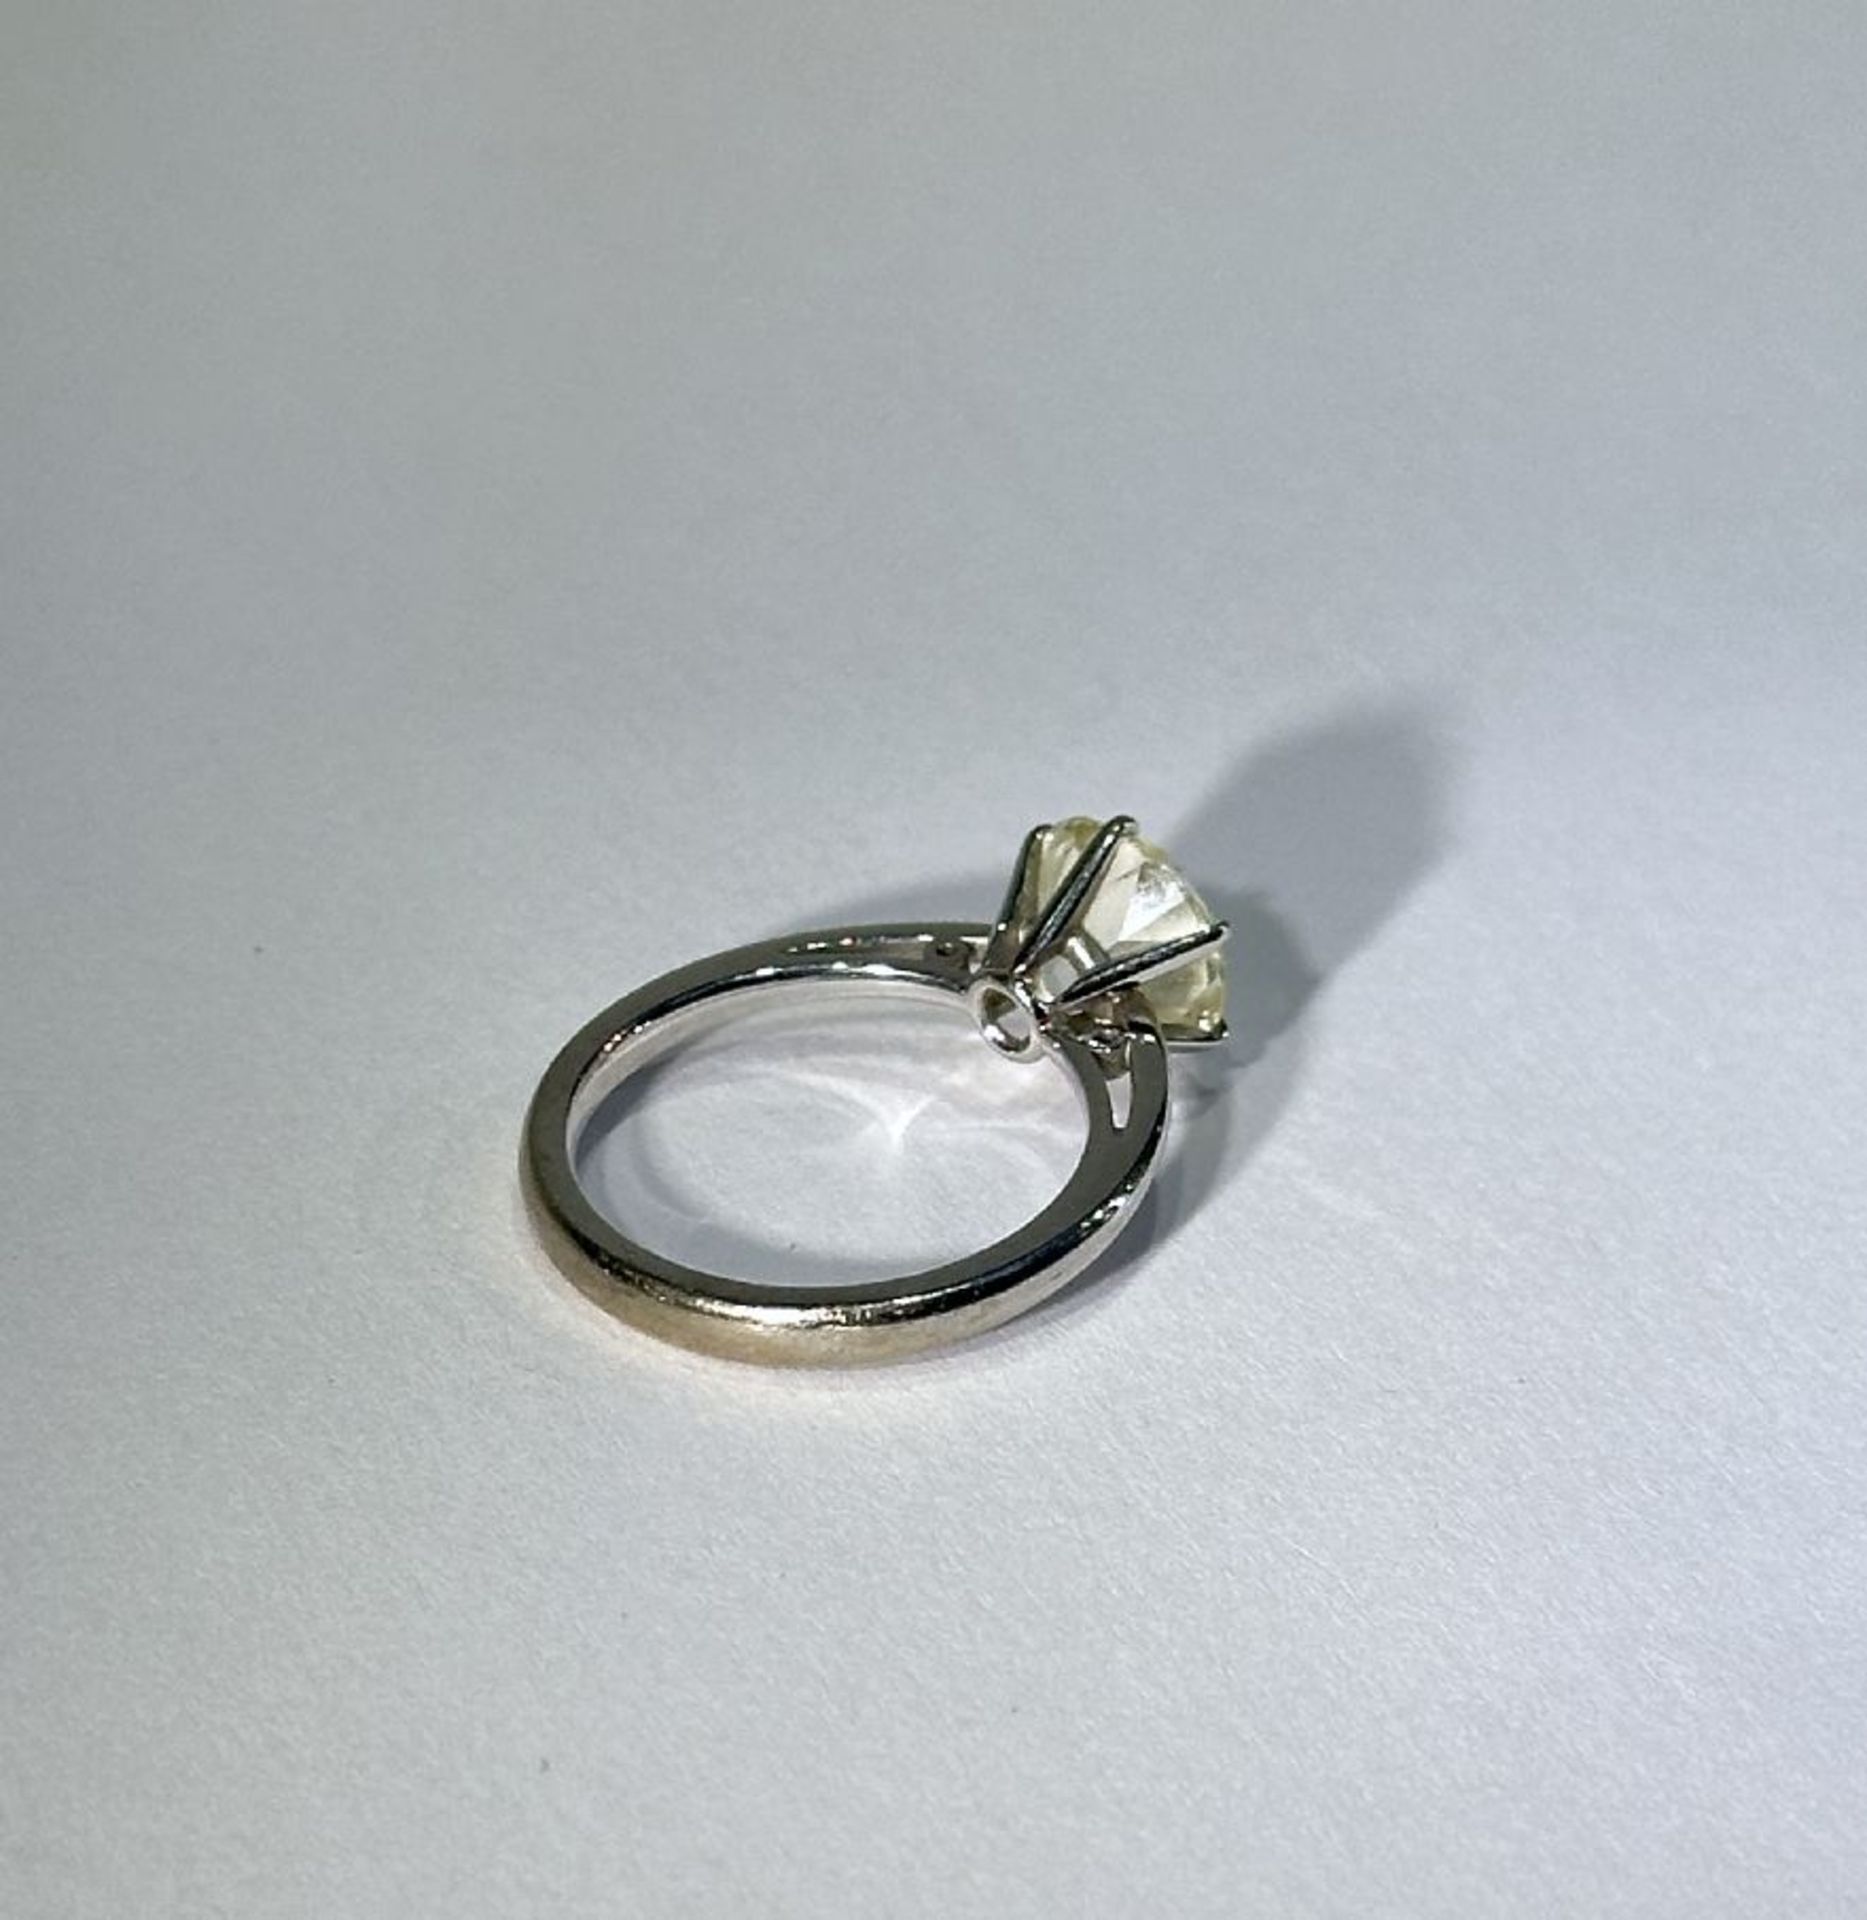 Ring in white gold (new frame) with diamond of approximately 2.5ct (old cut) - Image 7 of 8